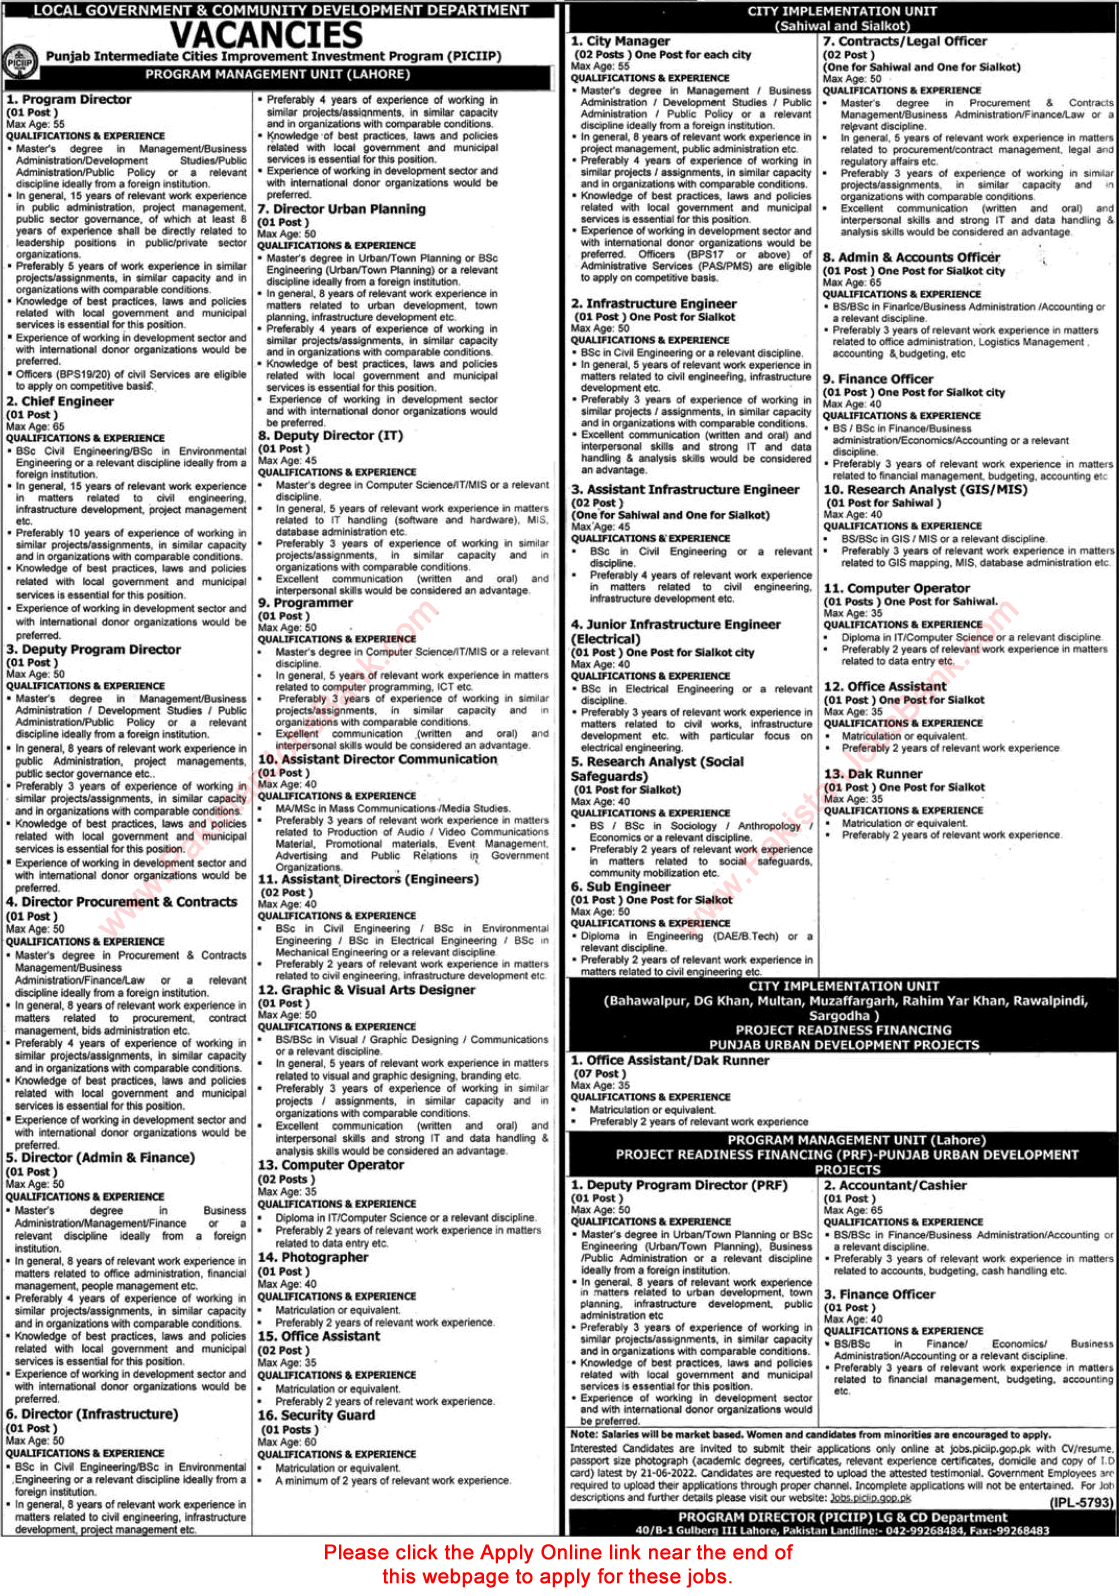 Local Government and Community Development Department Punjab Jobs June 2022 PICIIP Apply Online Latest